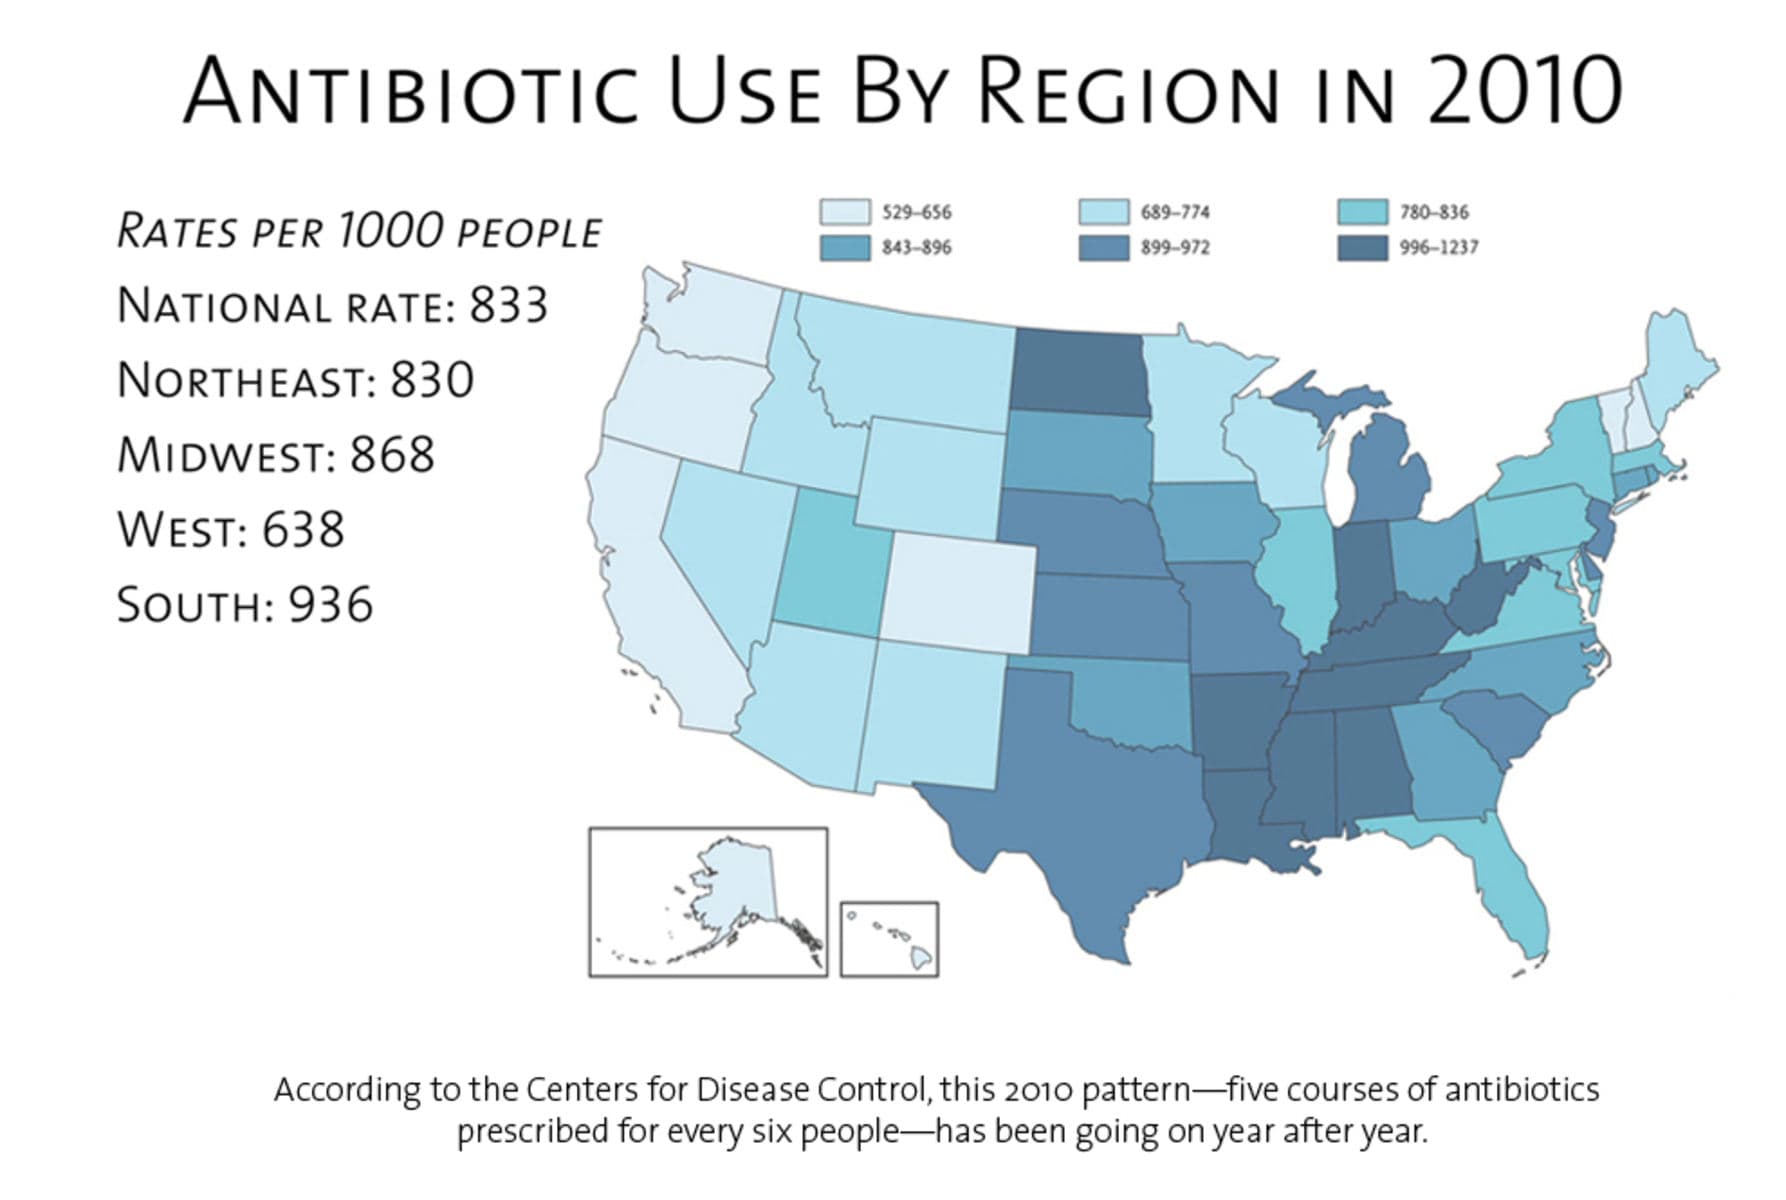 Map of the USA indicating rates of antibiotic use per 1,000 people by region in 2010. It states a national rate of 833.